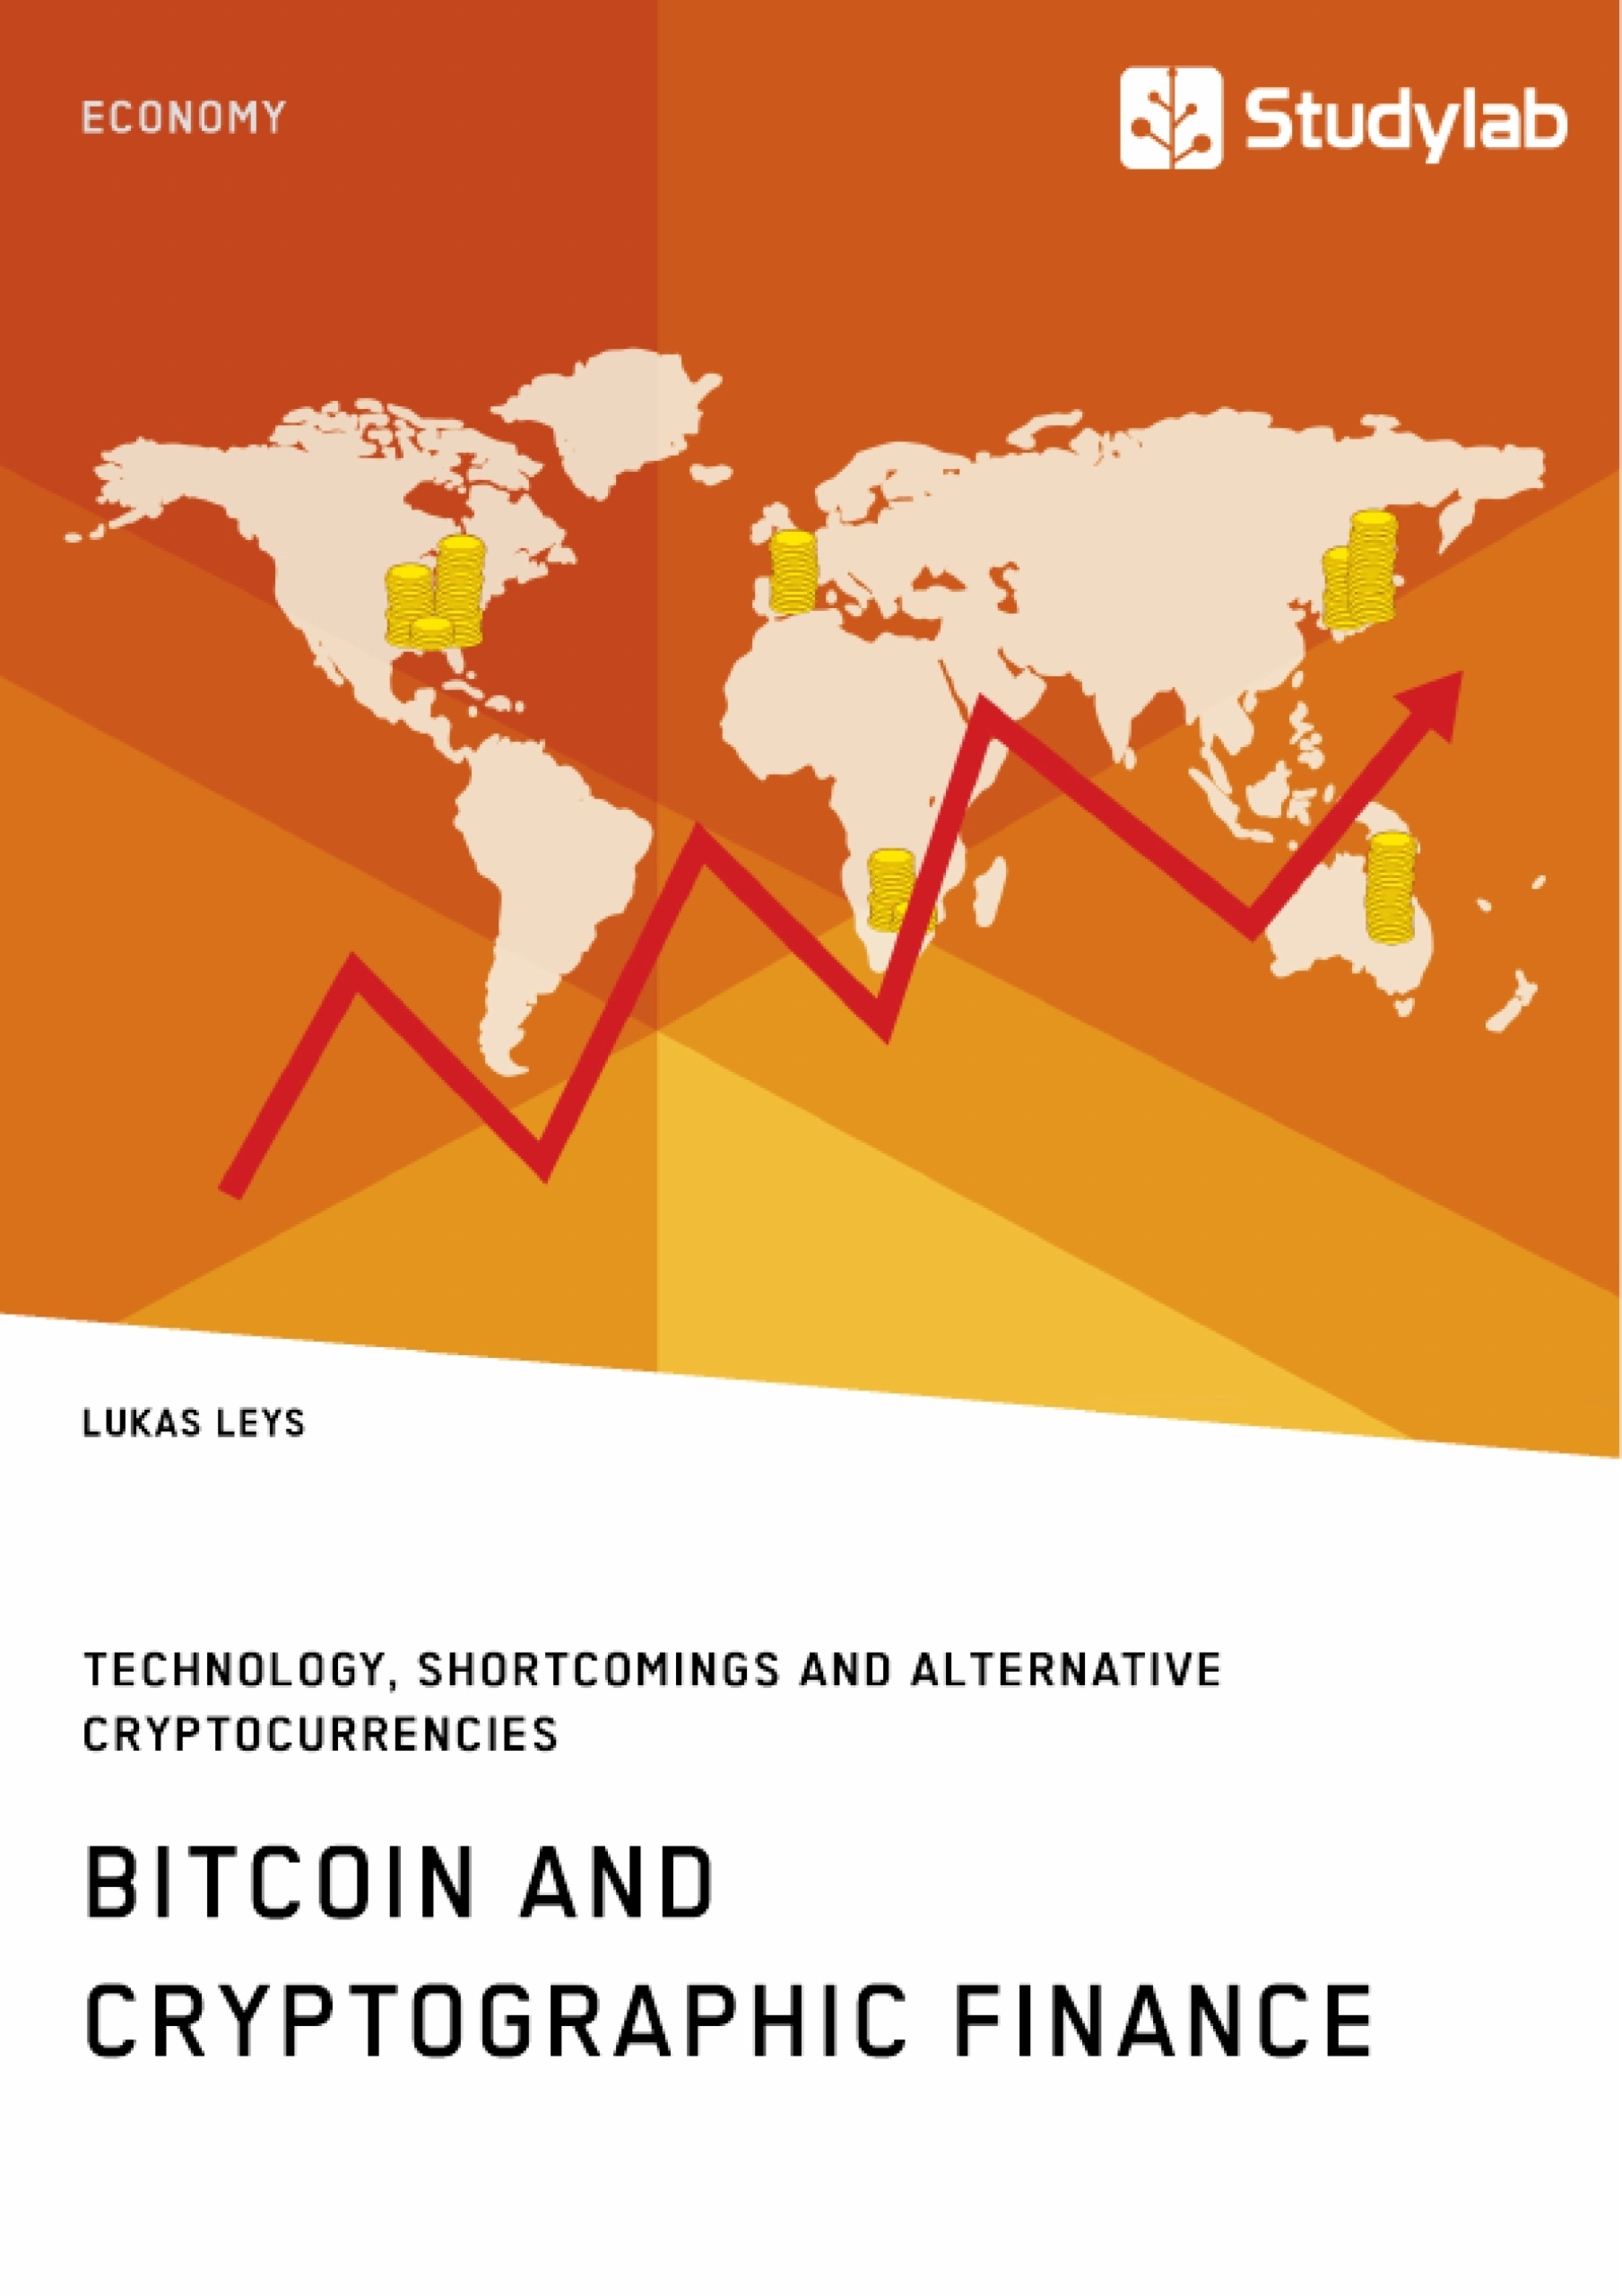 Title: Bitcoin and Cryptographic Finance. Technology, Shortcomings and Alternative Cryptocurrencies